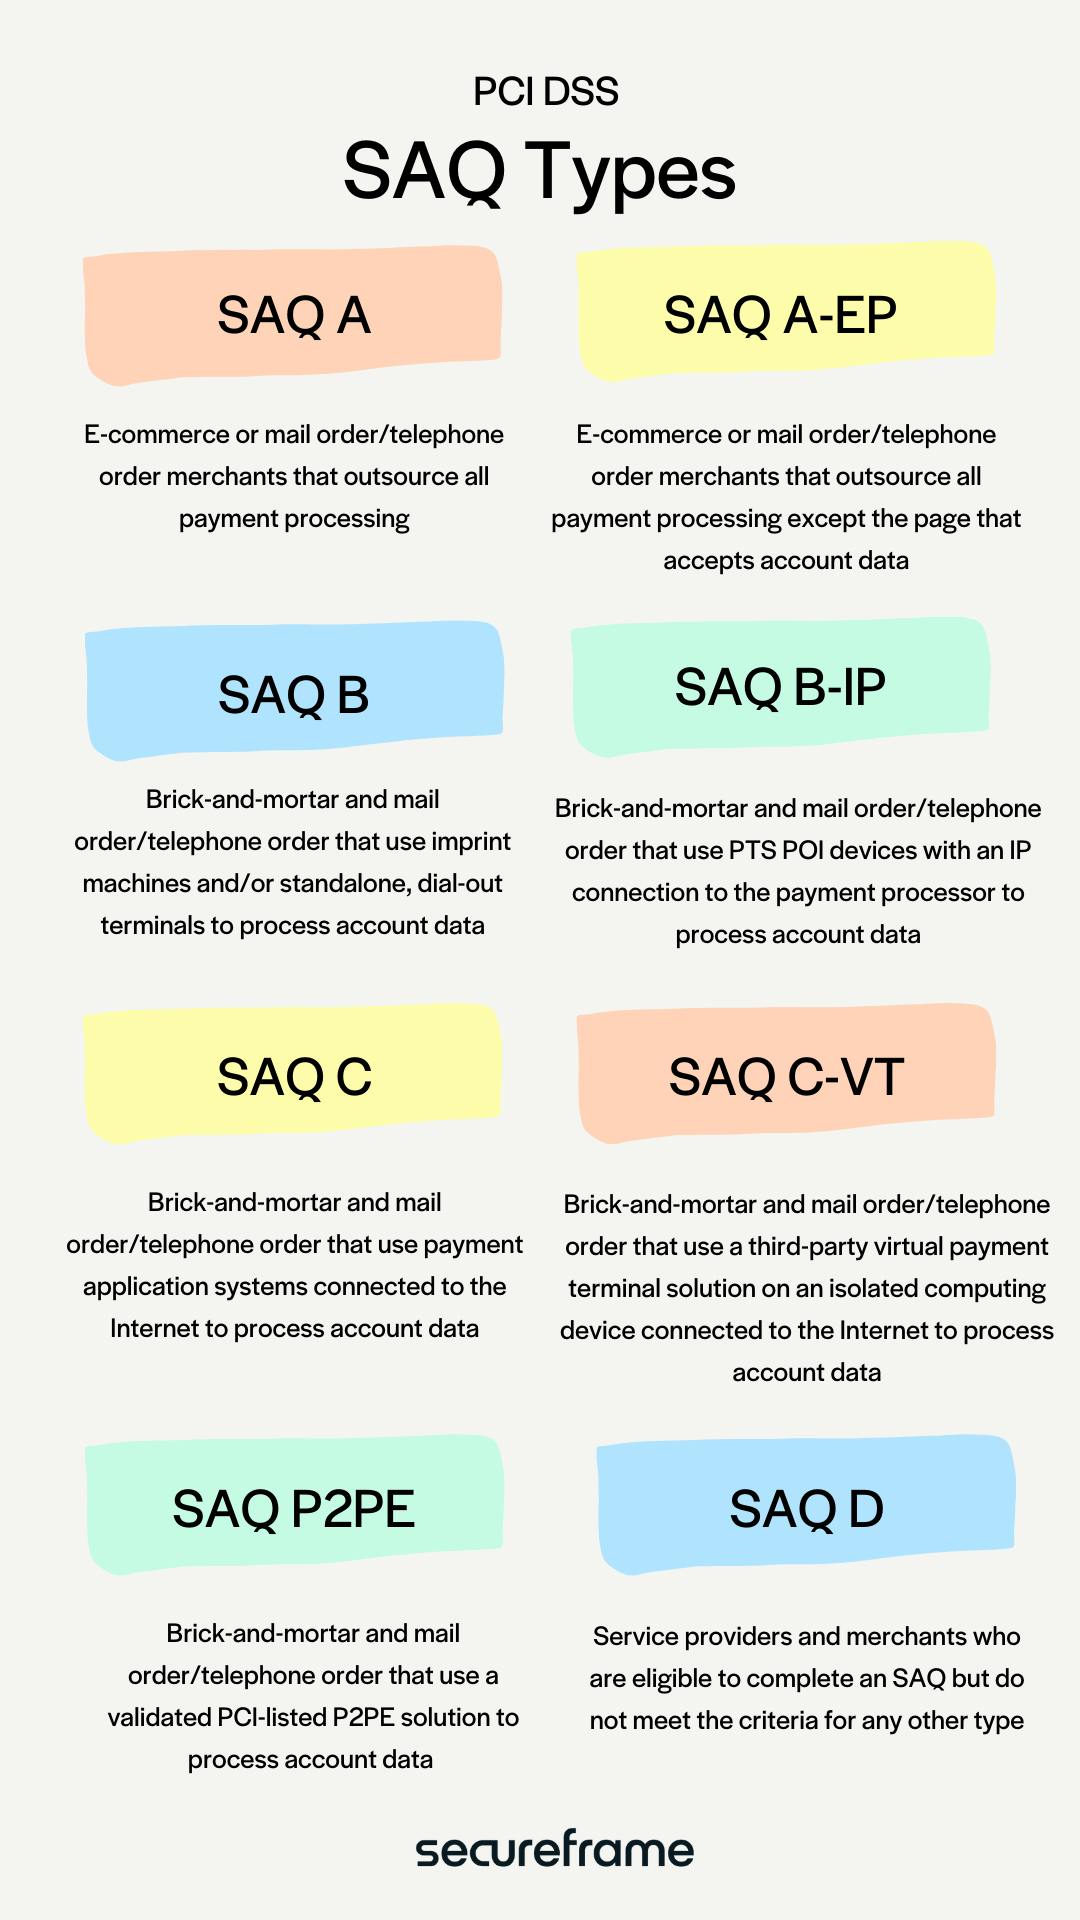 Overview of the 8 PCI SAQ types